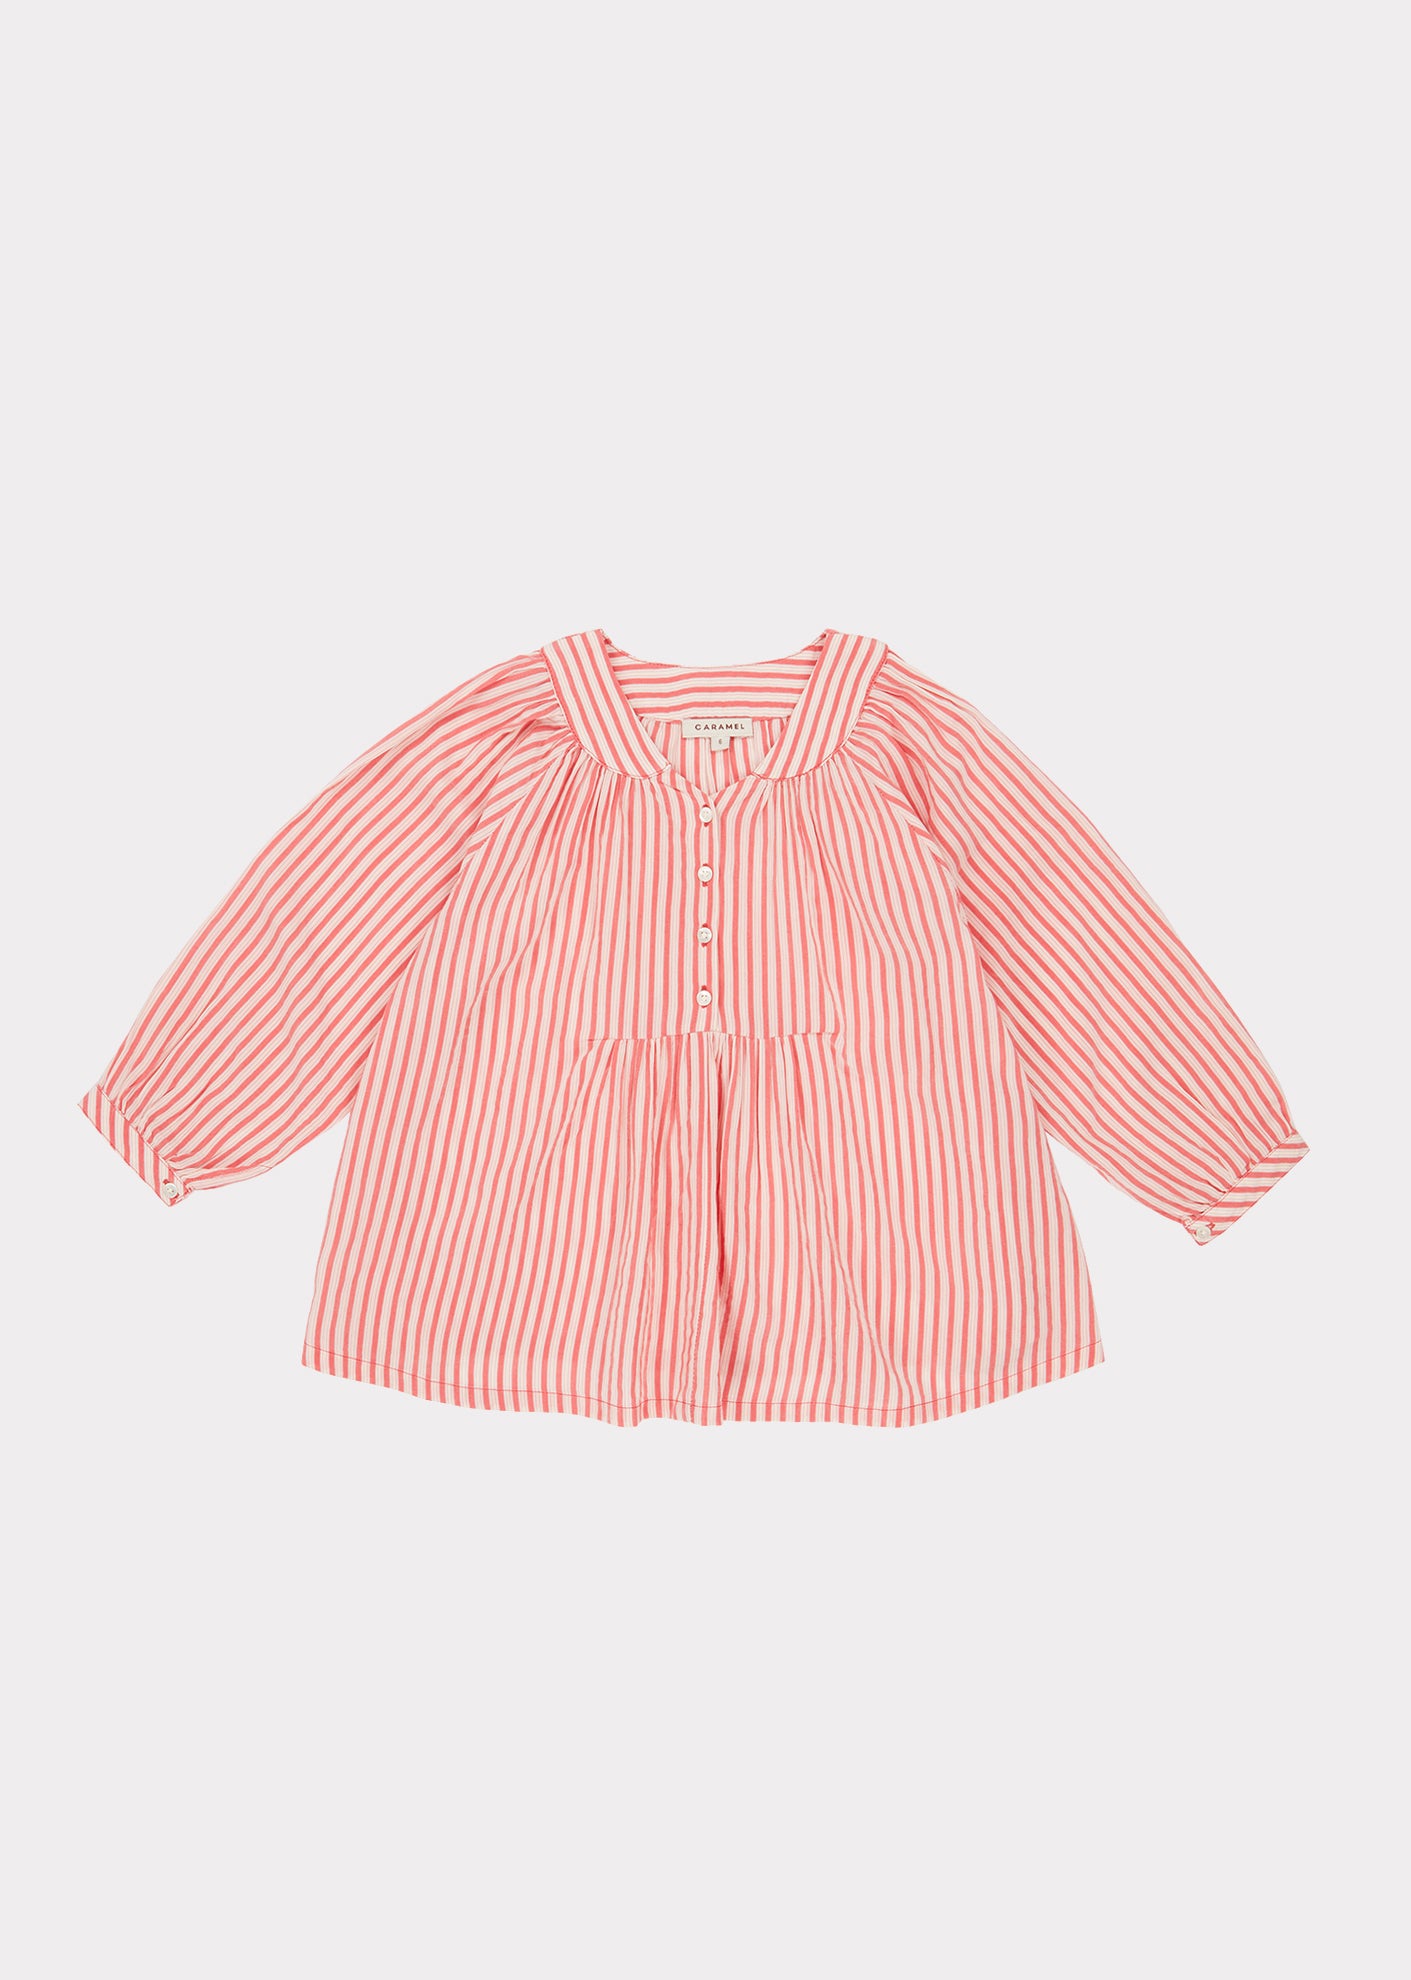 Girls Red Striped Top